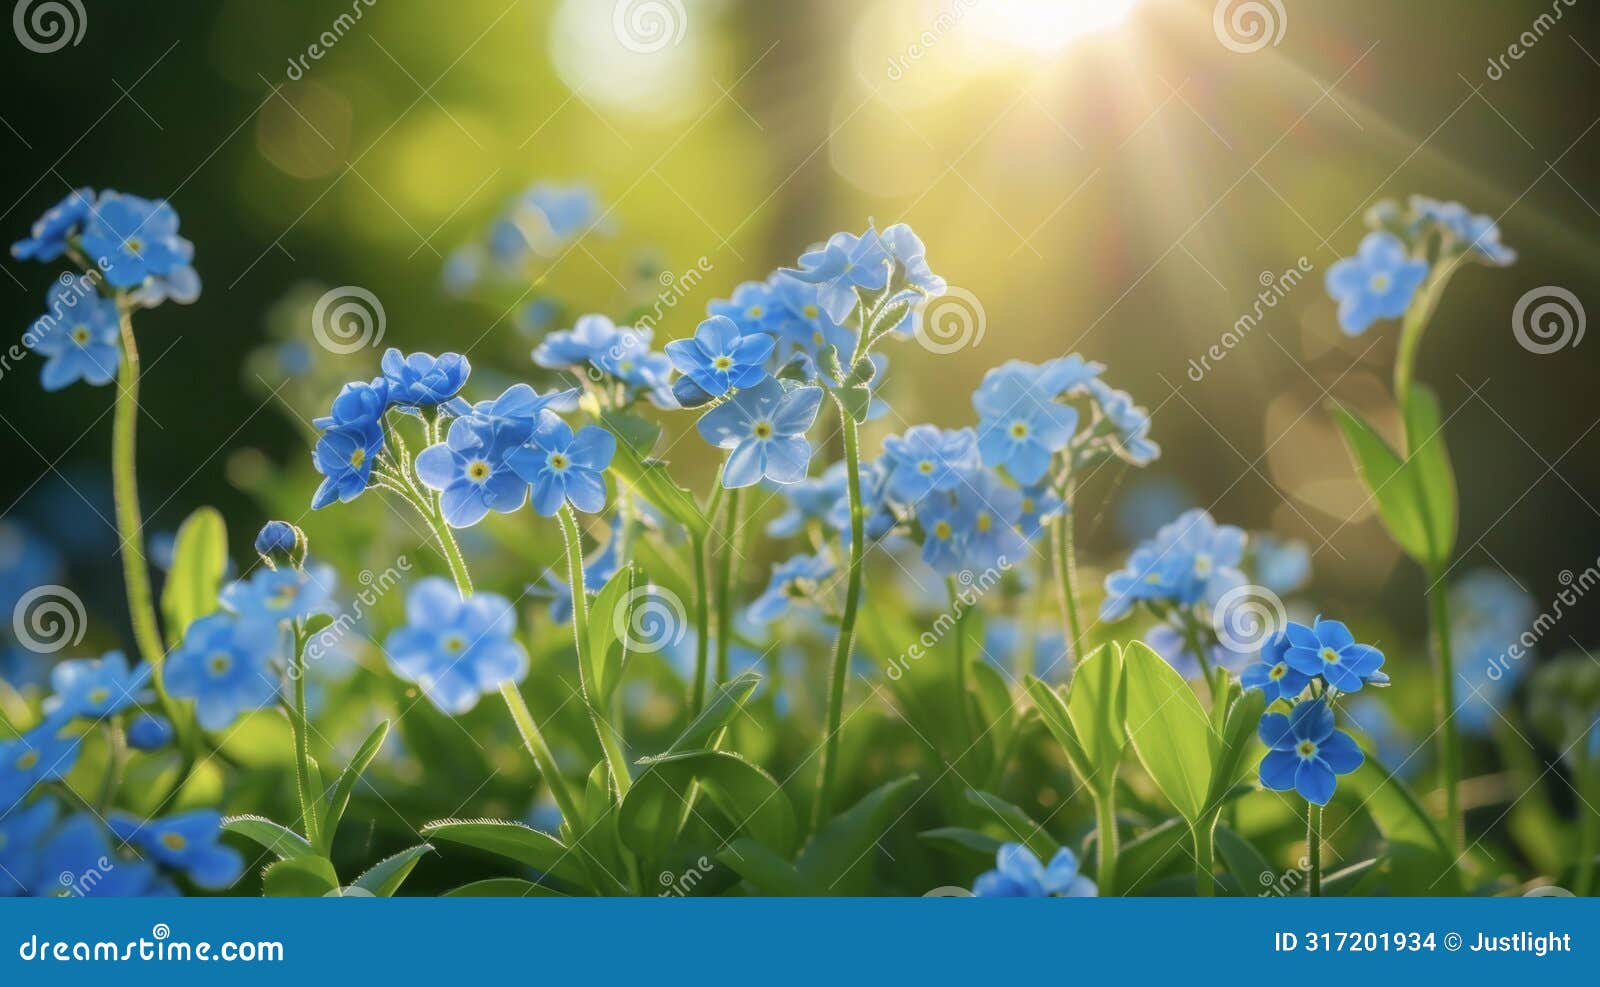 a row of delicate forgetmenots each tiny blue flower seeming to shine in the suns rays ping through their petals